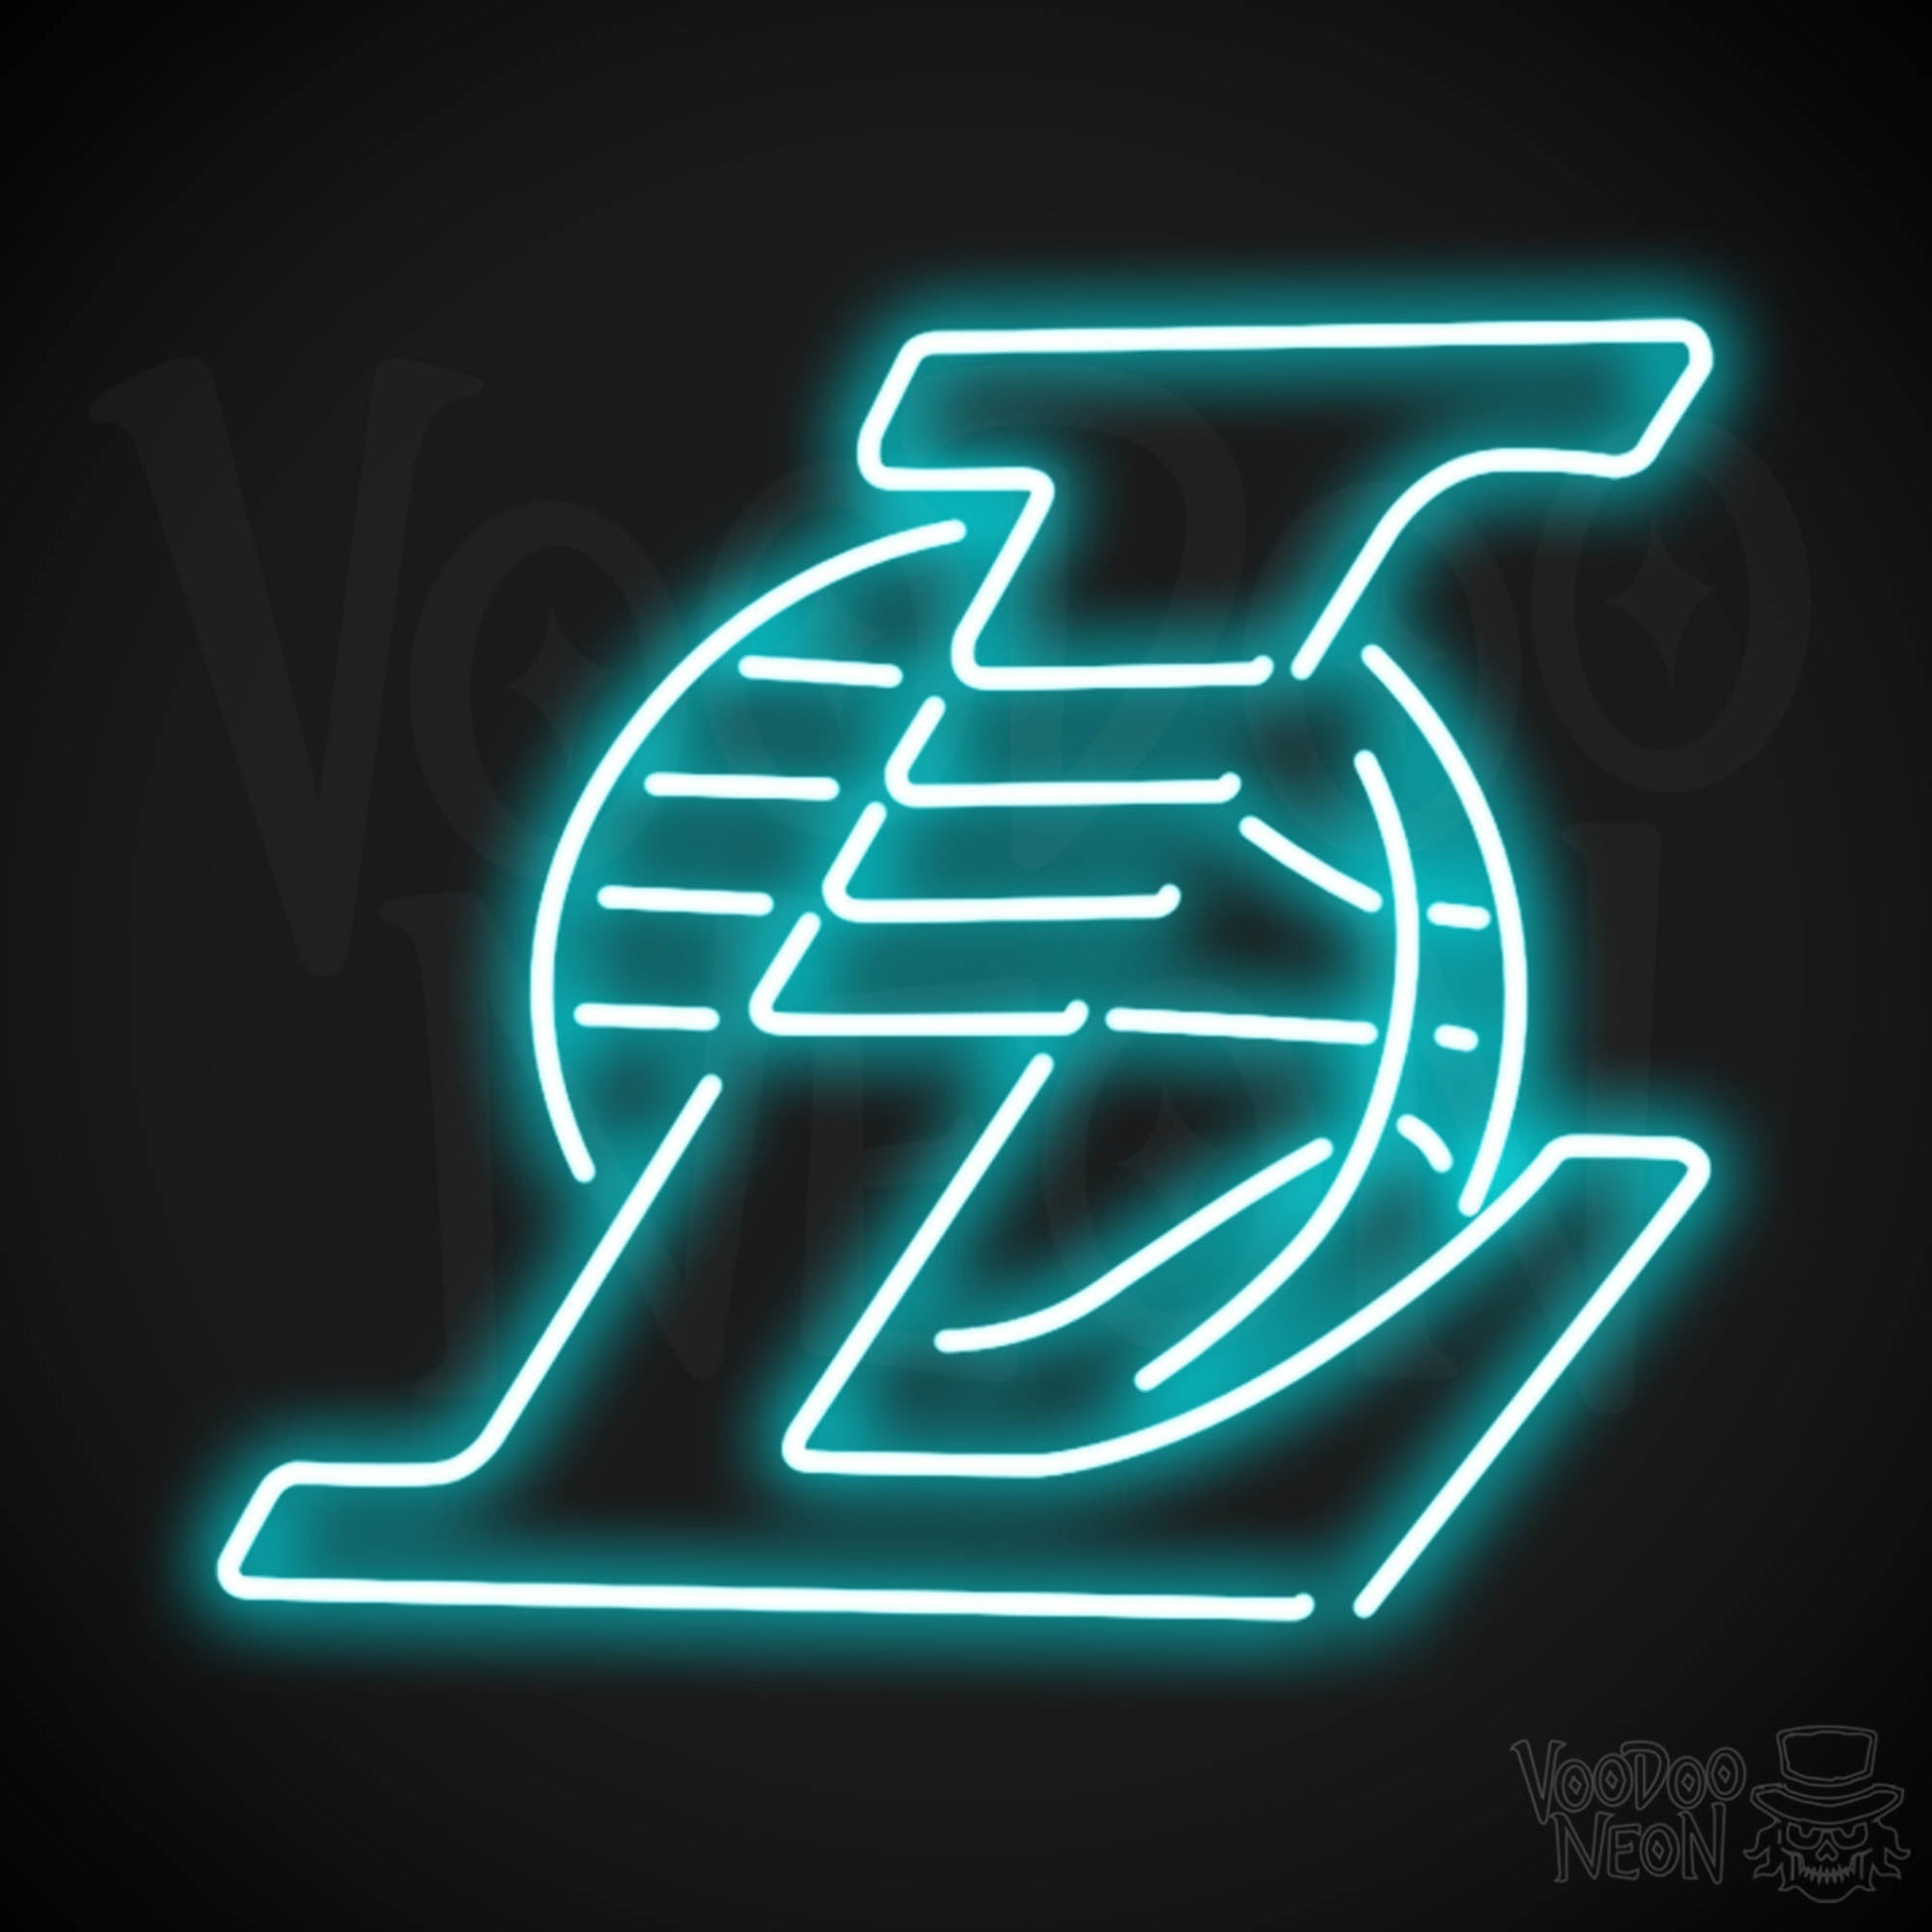 Los Angeles Lakers Neon Sign - Los Angeles Lakers Sign - Neon Lakers Logo Wall Art - Color Ice Blue